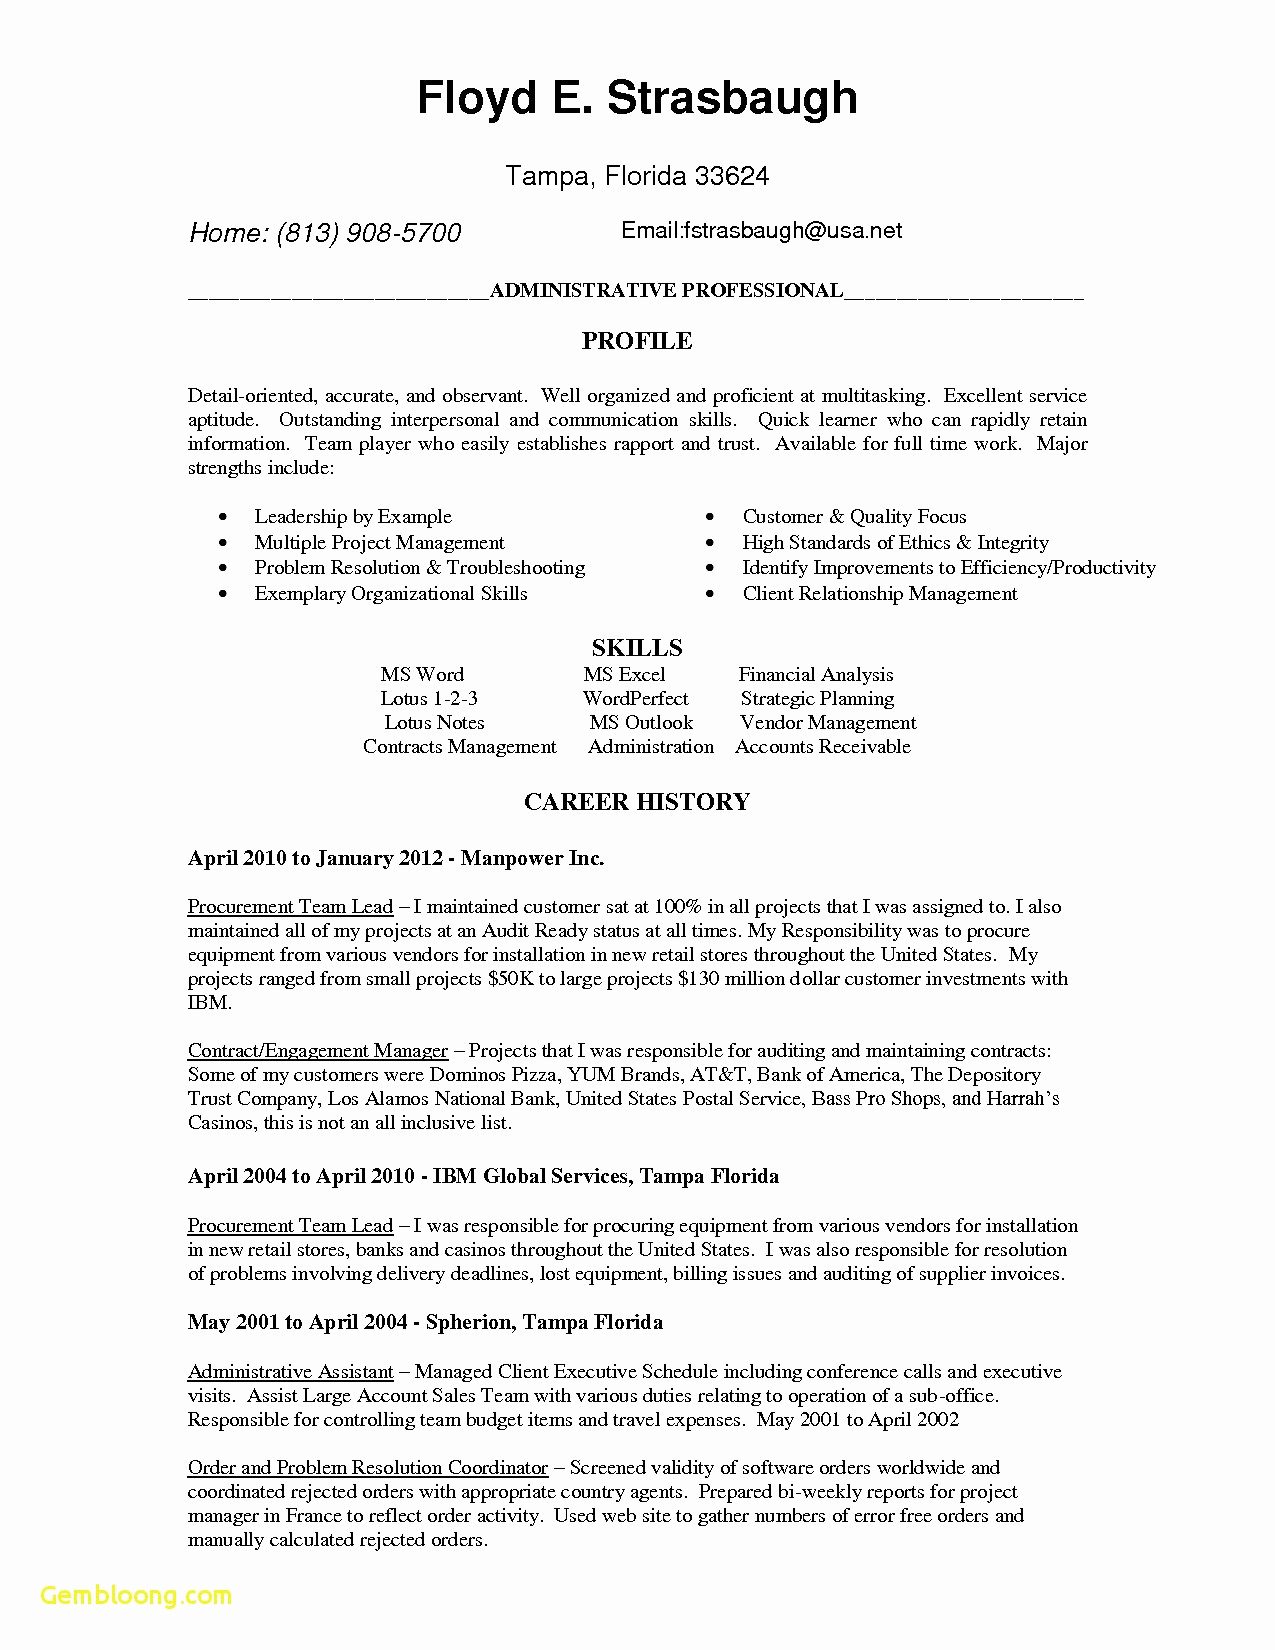 Cover Letter Template for Teenager - Cover Letter for Teenager Awesome Career Resume Valid Fresh Resume